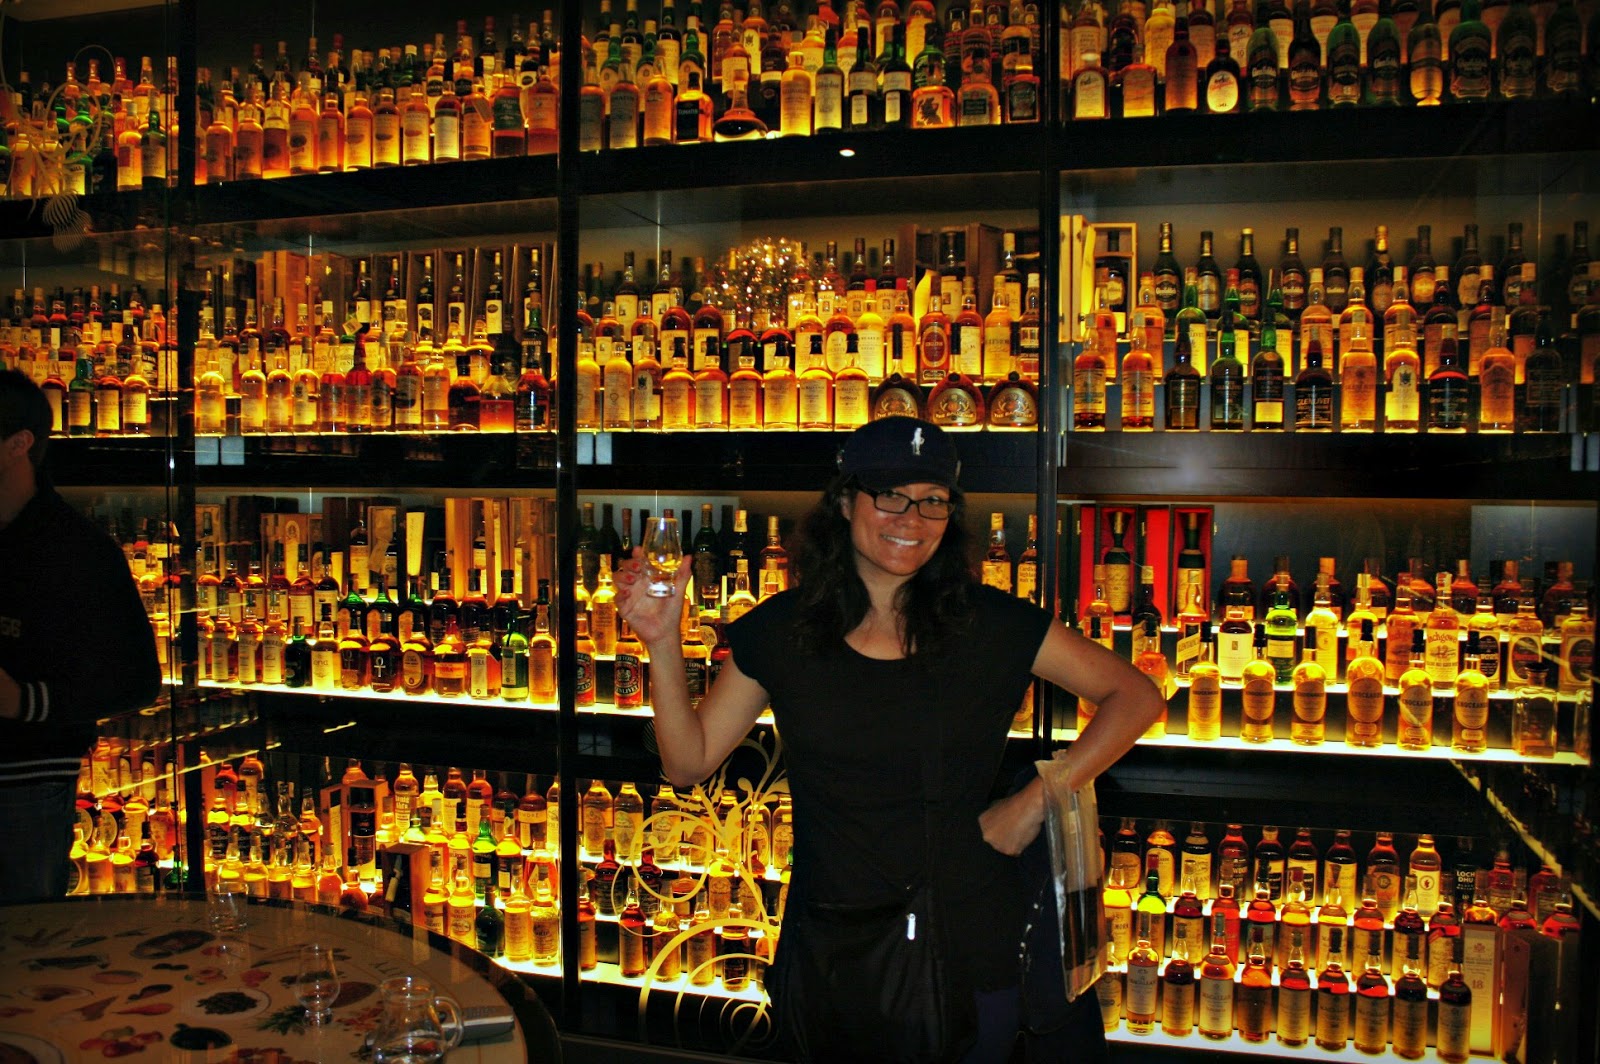 Scotch Whiskey Experience